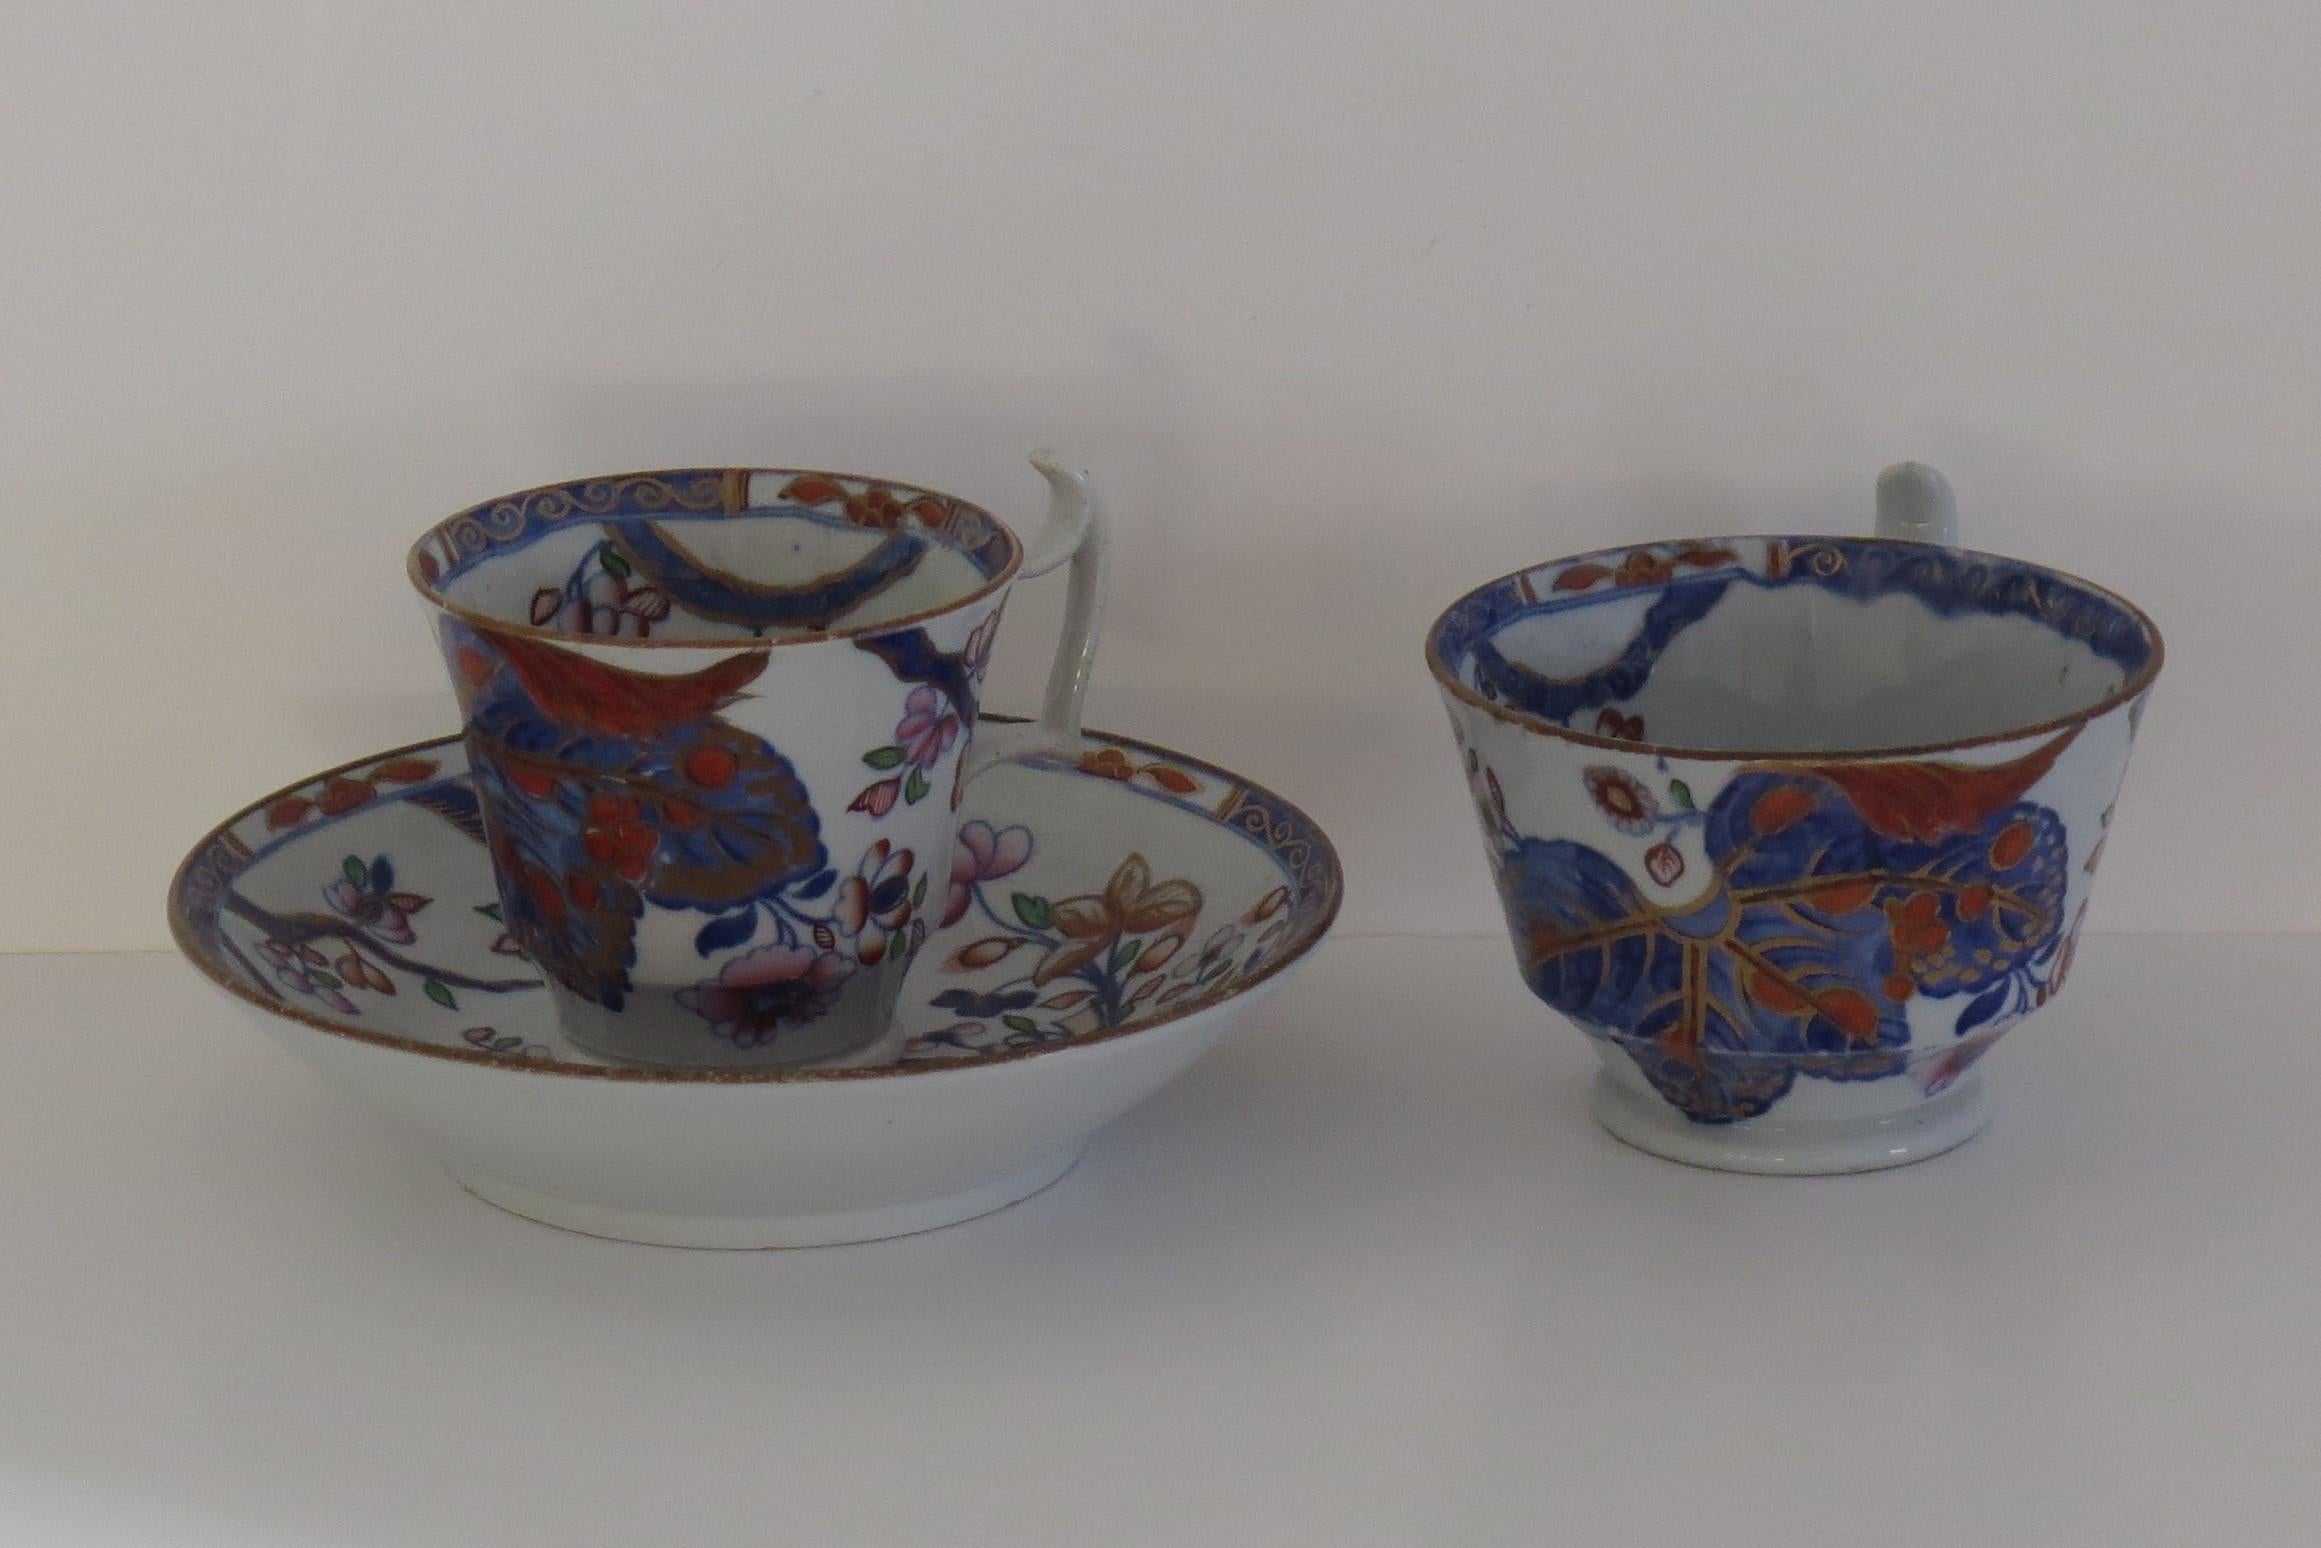 This is a good stone China (Ironstone) TRIO of three pieces, all in the hand - painted Tobacco Leaf pattern number 2061, made by the Spode / Copeland & Garrett & Copeland factories during the 19th century.

The three pieces are a harlequin set as